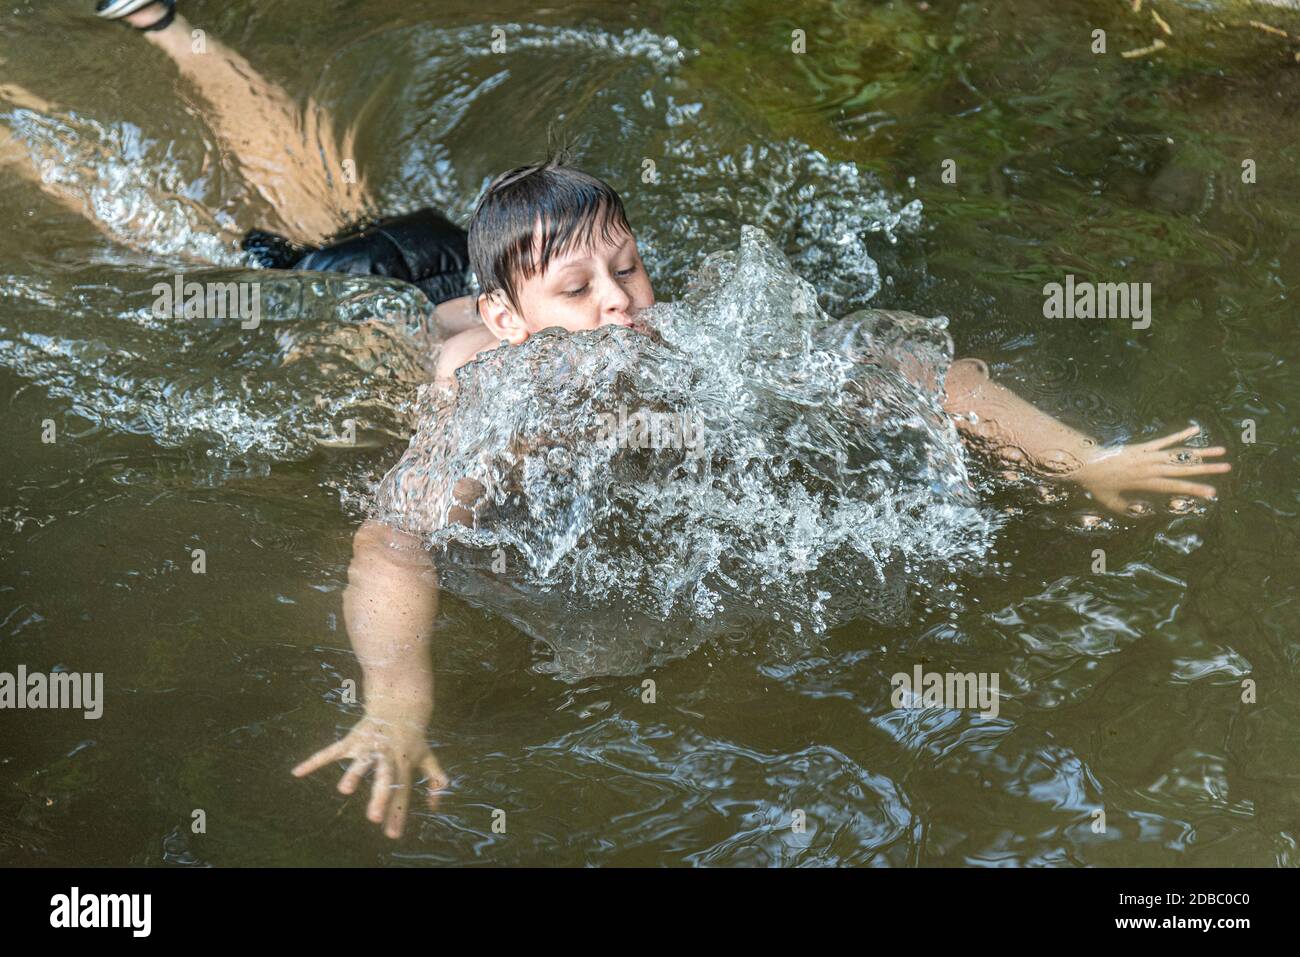 Boy swimming in a pond, water splashes Stock Photo